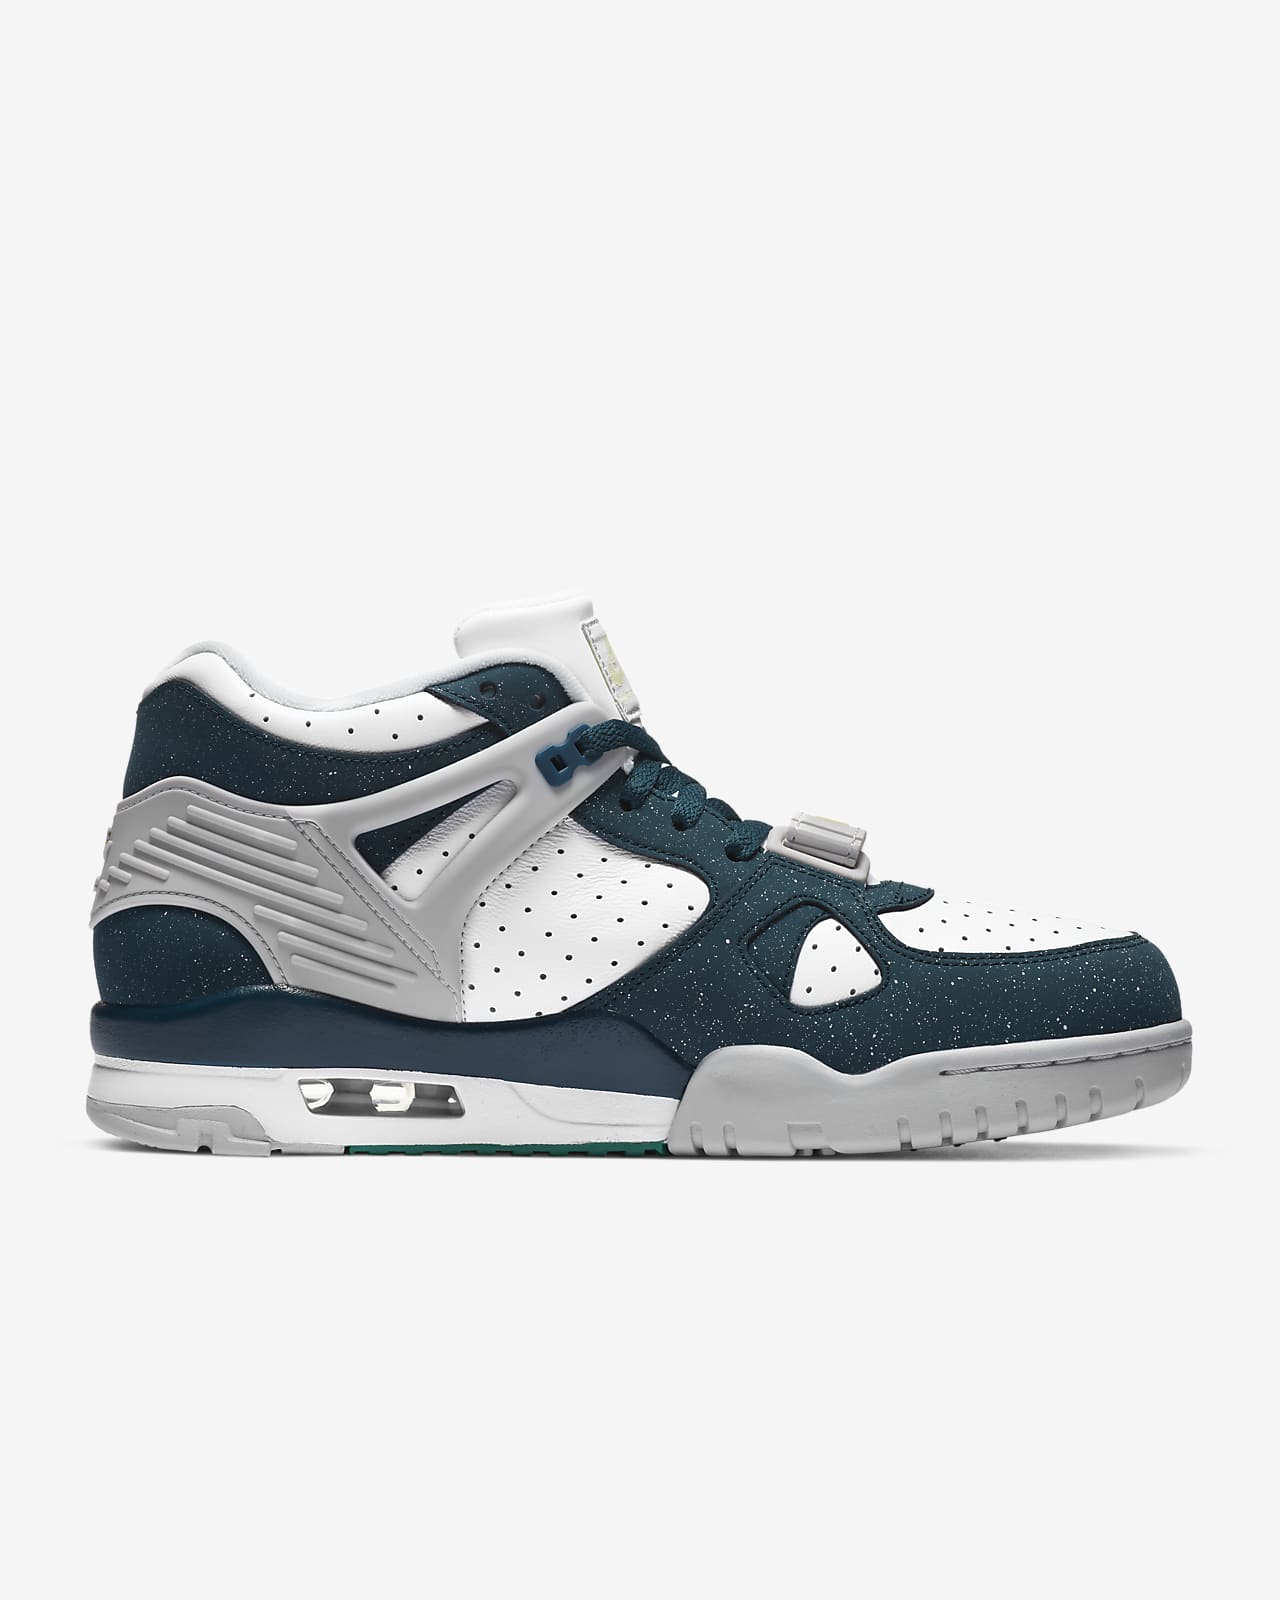 men's nike air trainer 3 training shoes